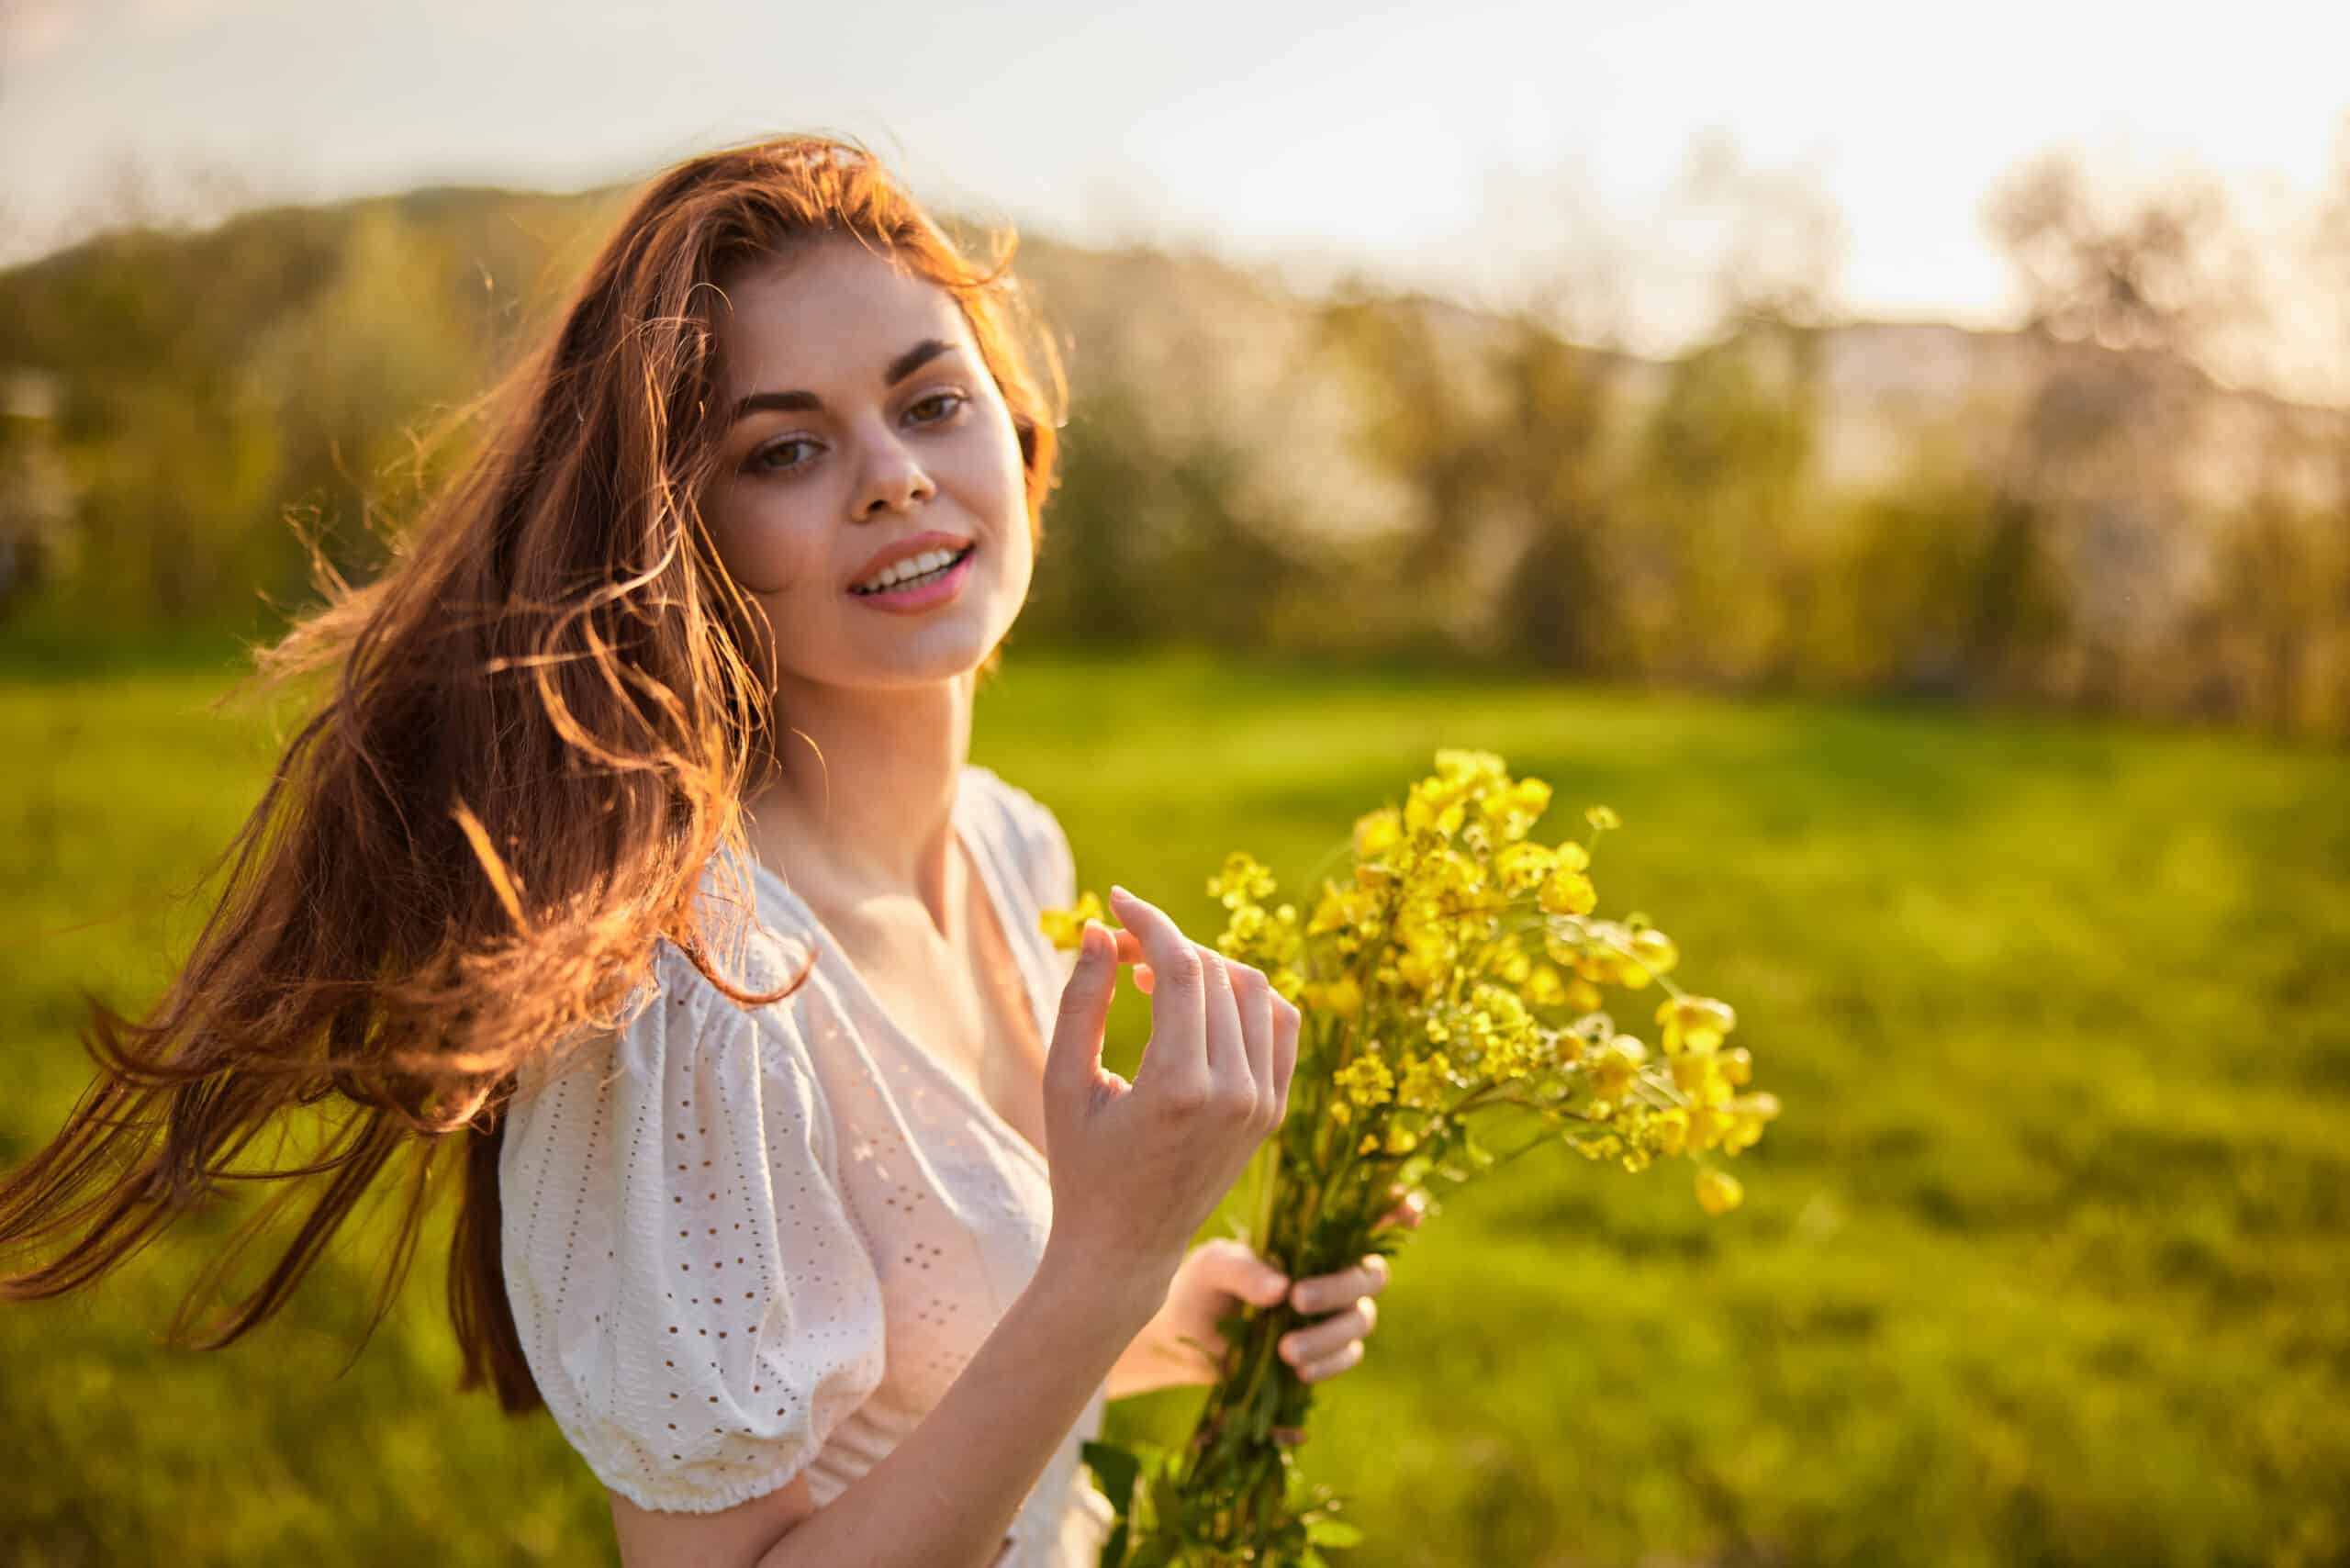 woman with a bouquet of wild yellow flowers in the rays of the setting sun in a field